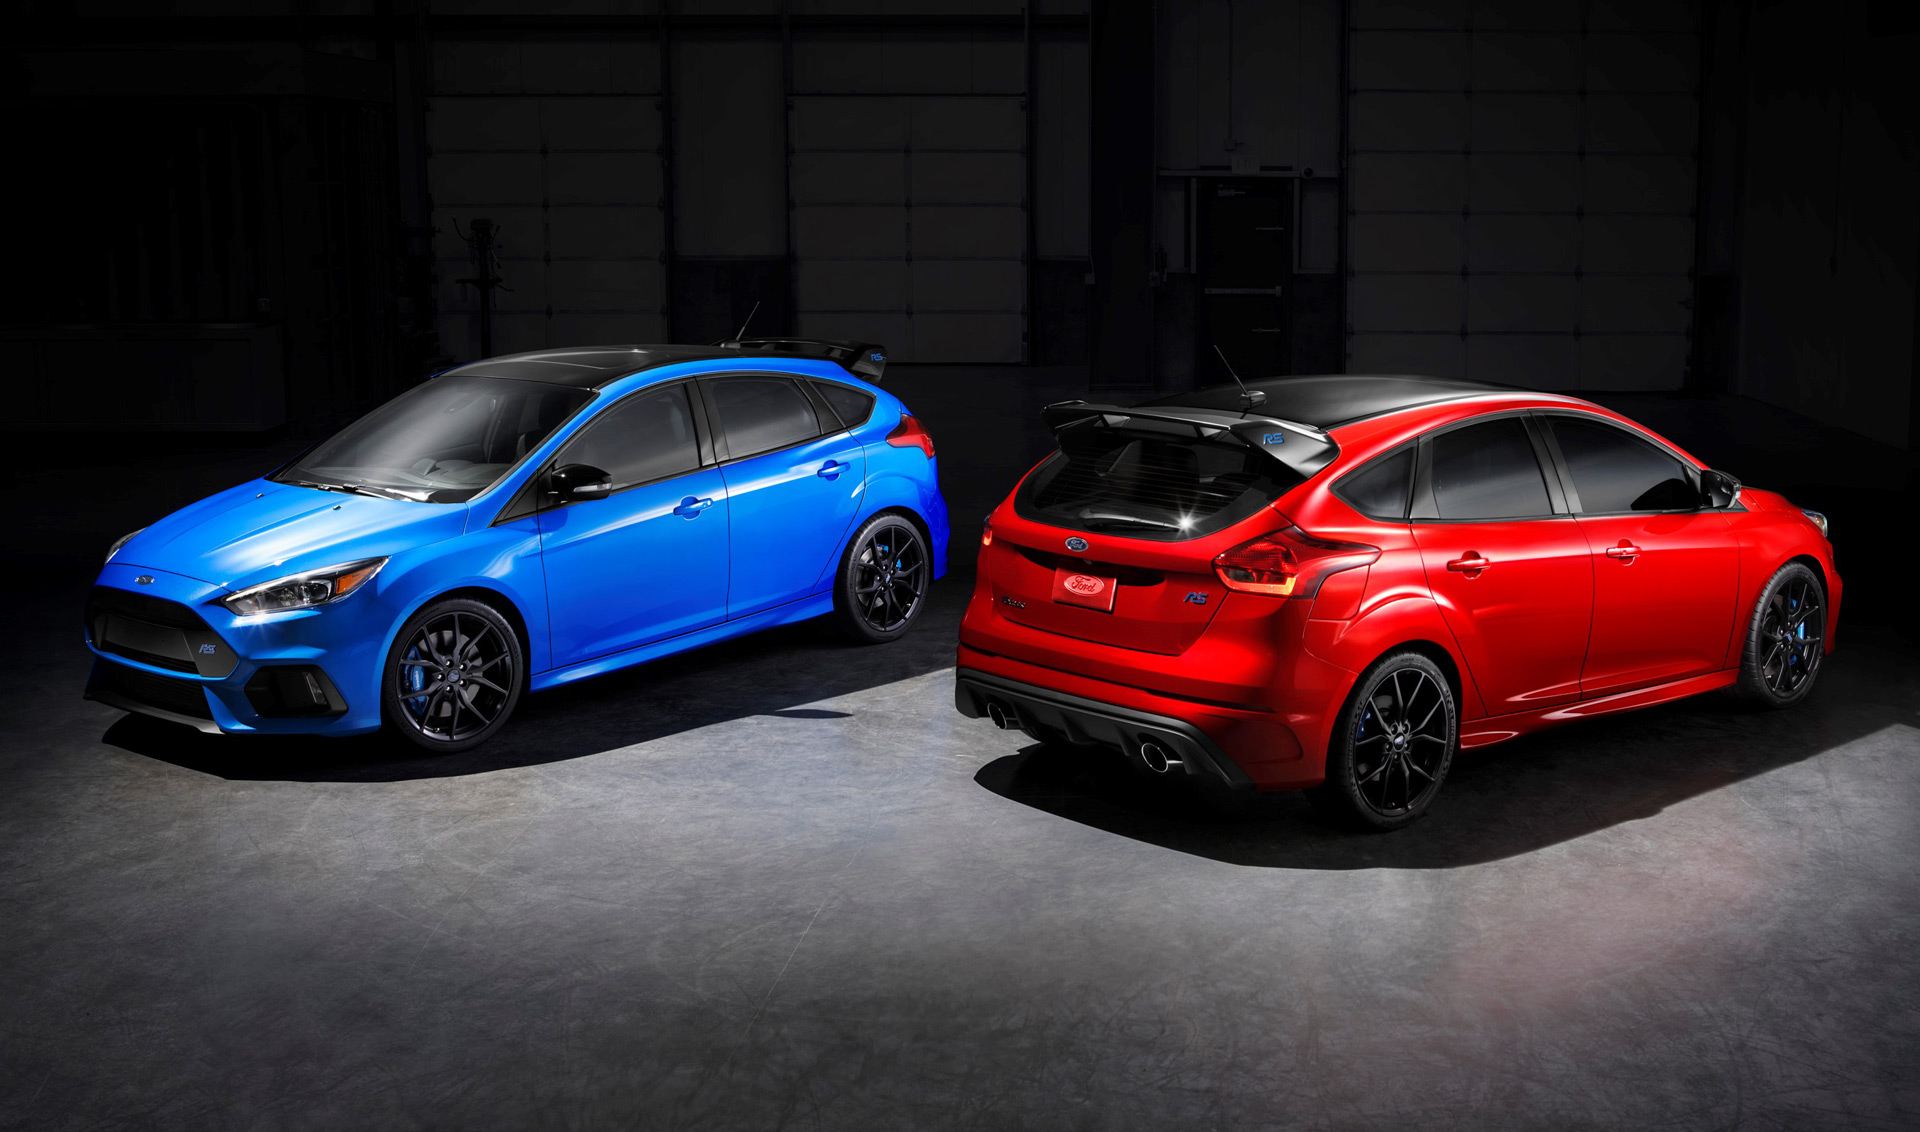 2018 Ford Focus RS Limited Edition priced at $41,995